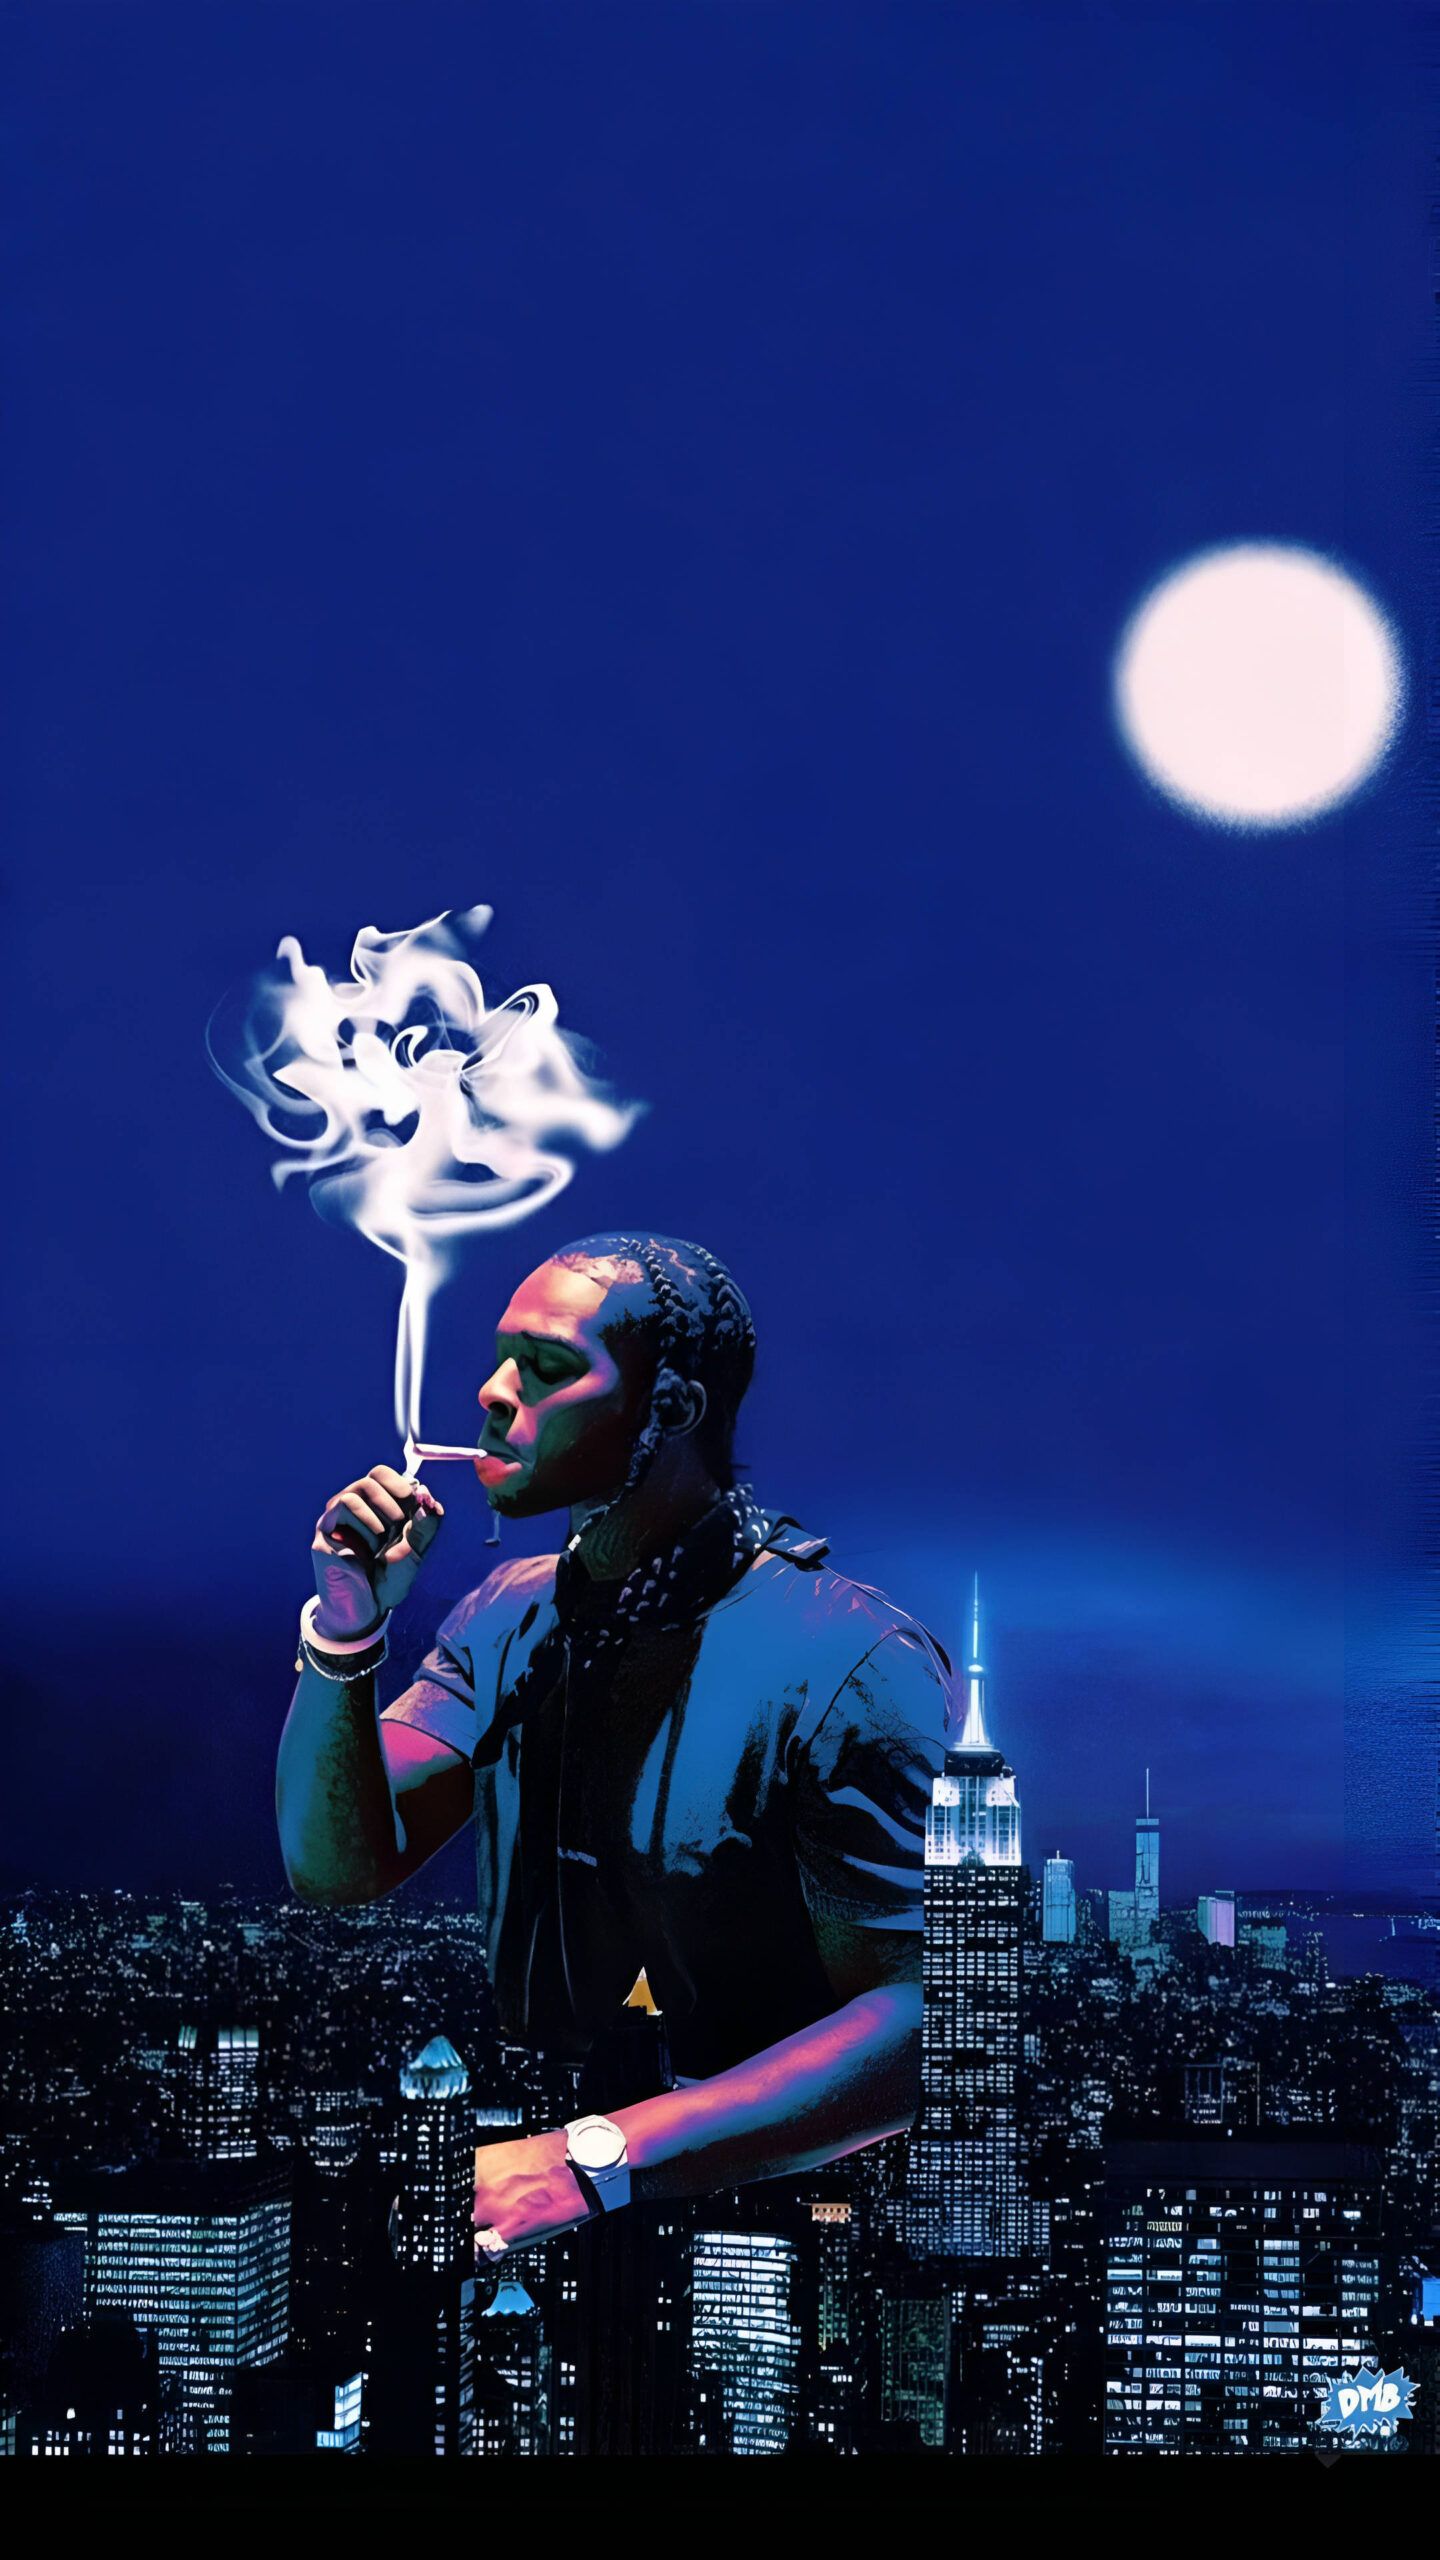 Rapper 2Pac smoking a cigarette in front of a city skyline - Pop Smoke